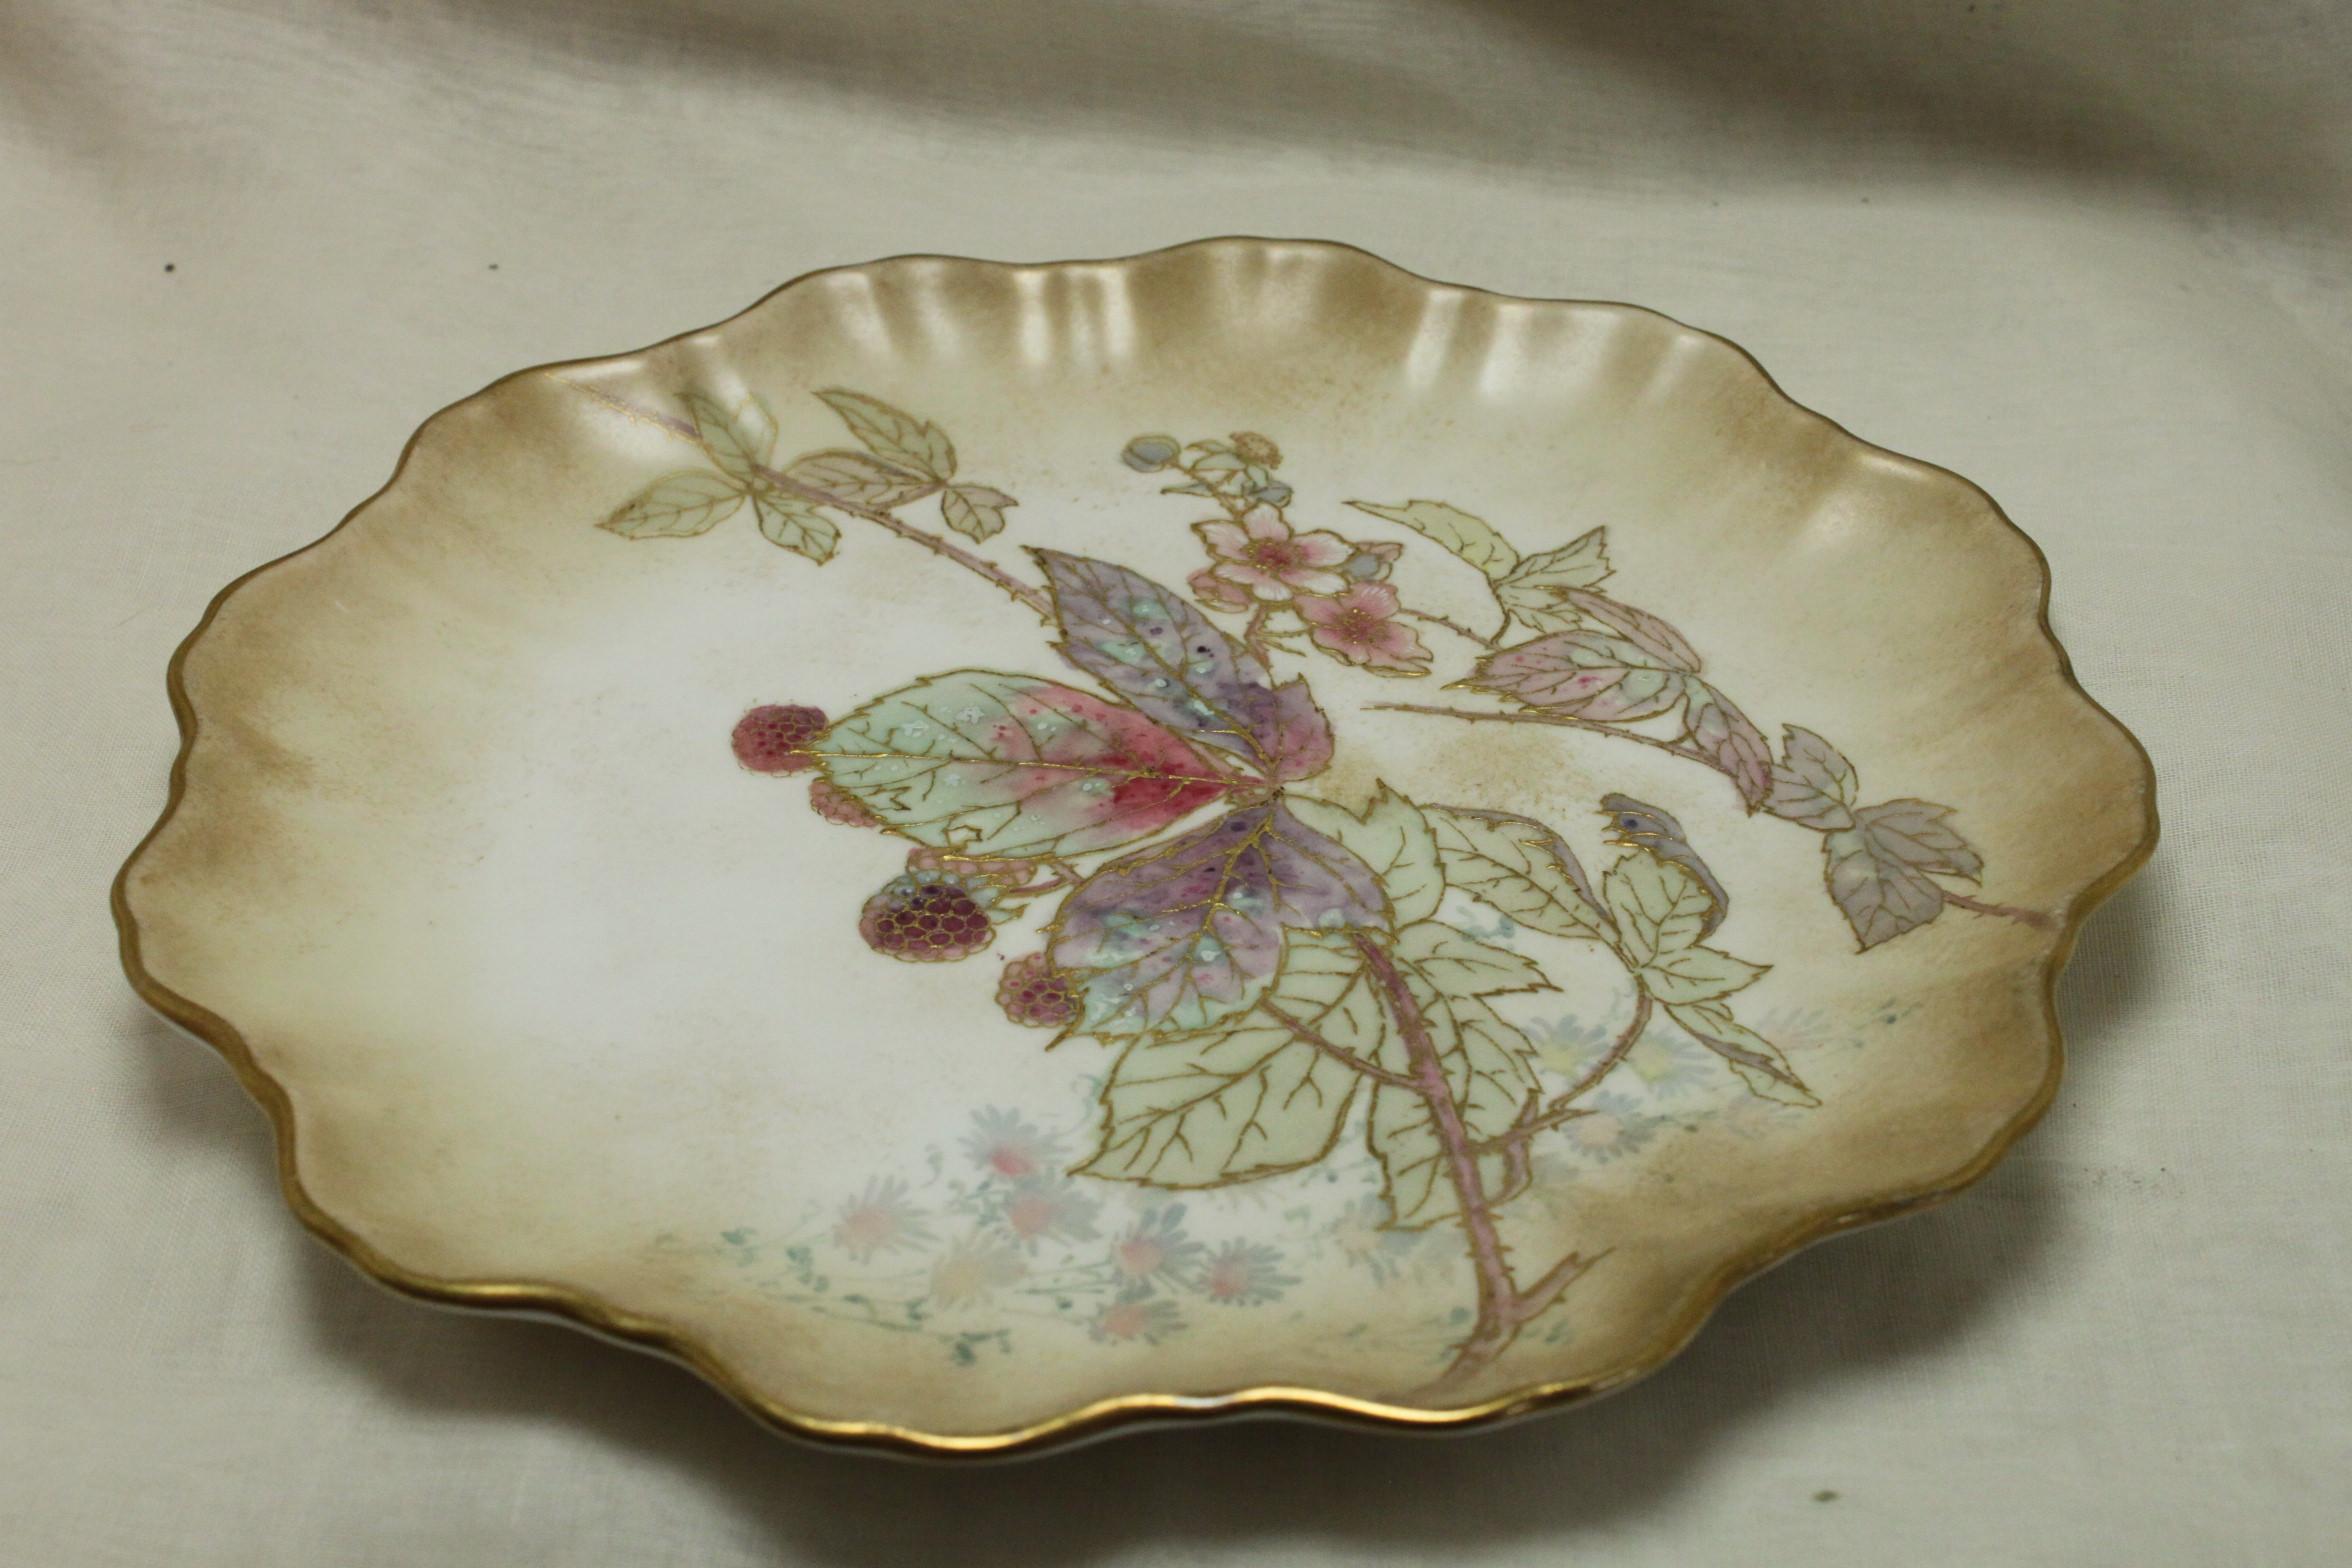 This porcelain plate from Doulton Burslem is decorated with s design from Doulton's 